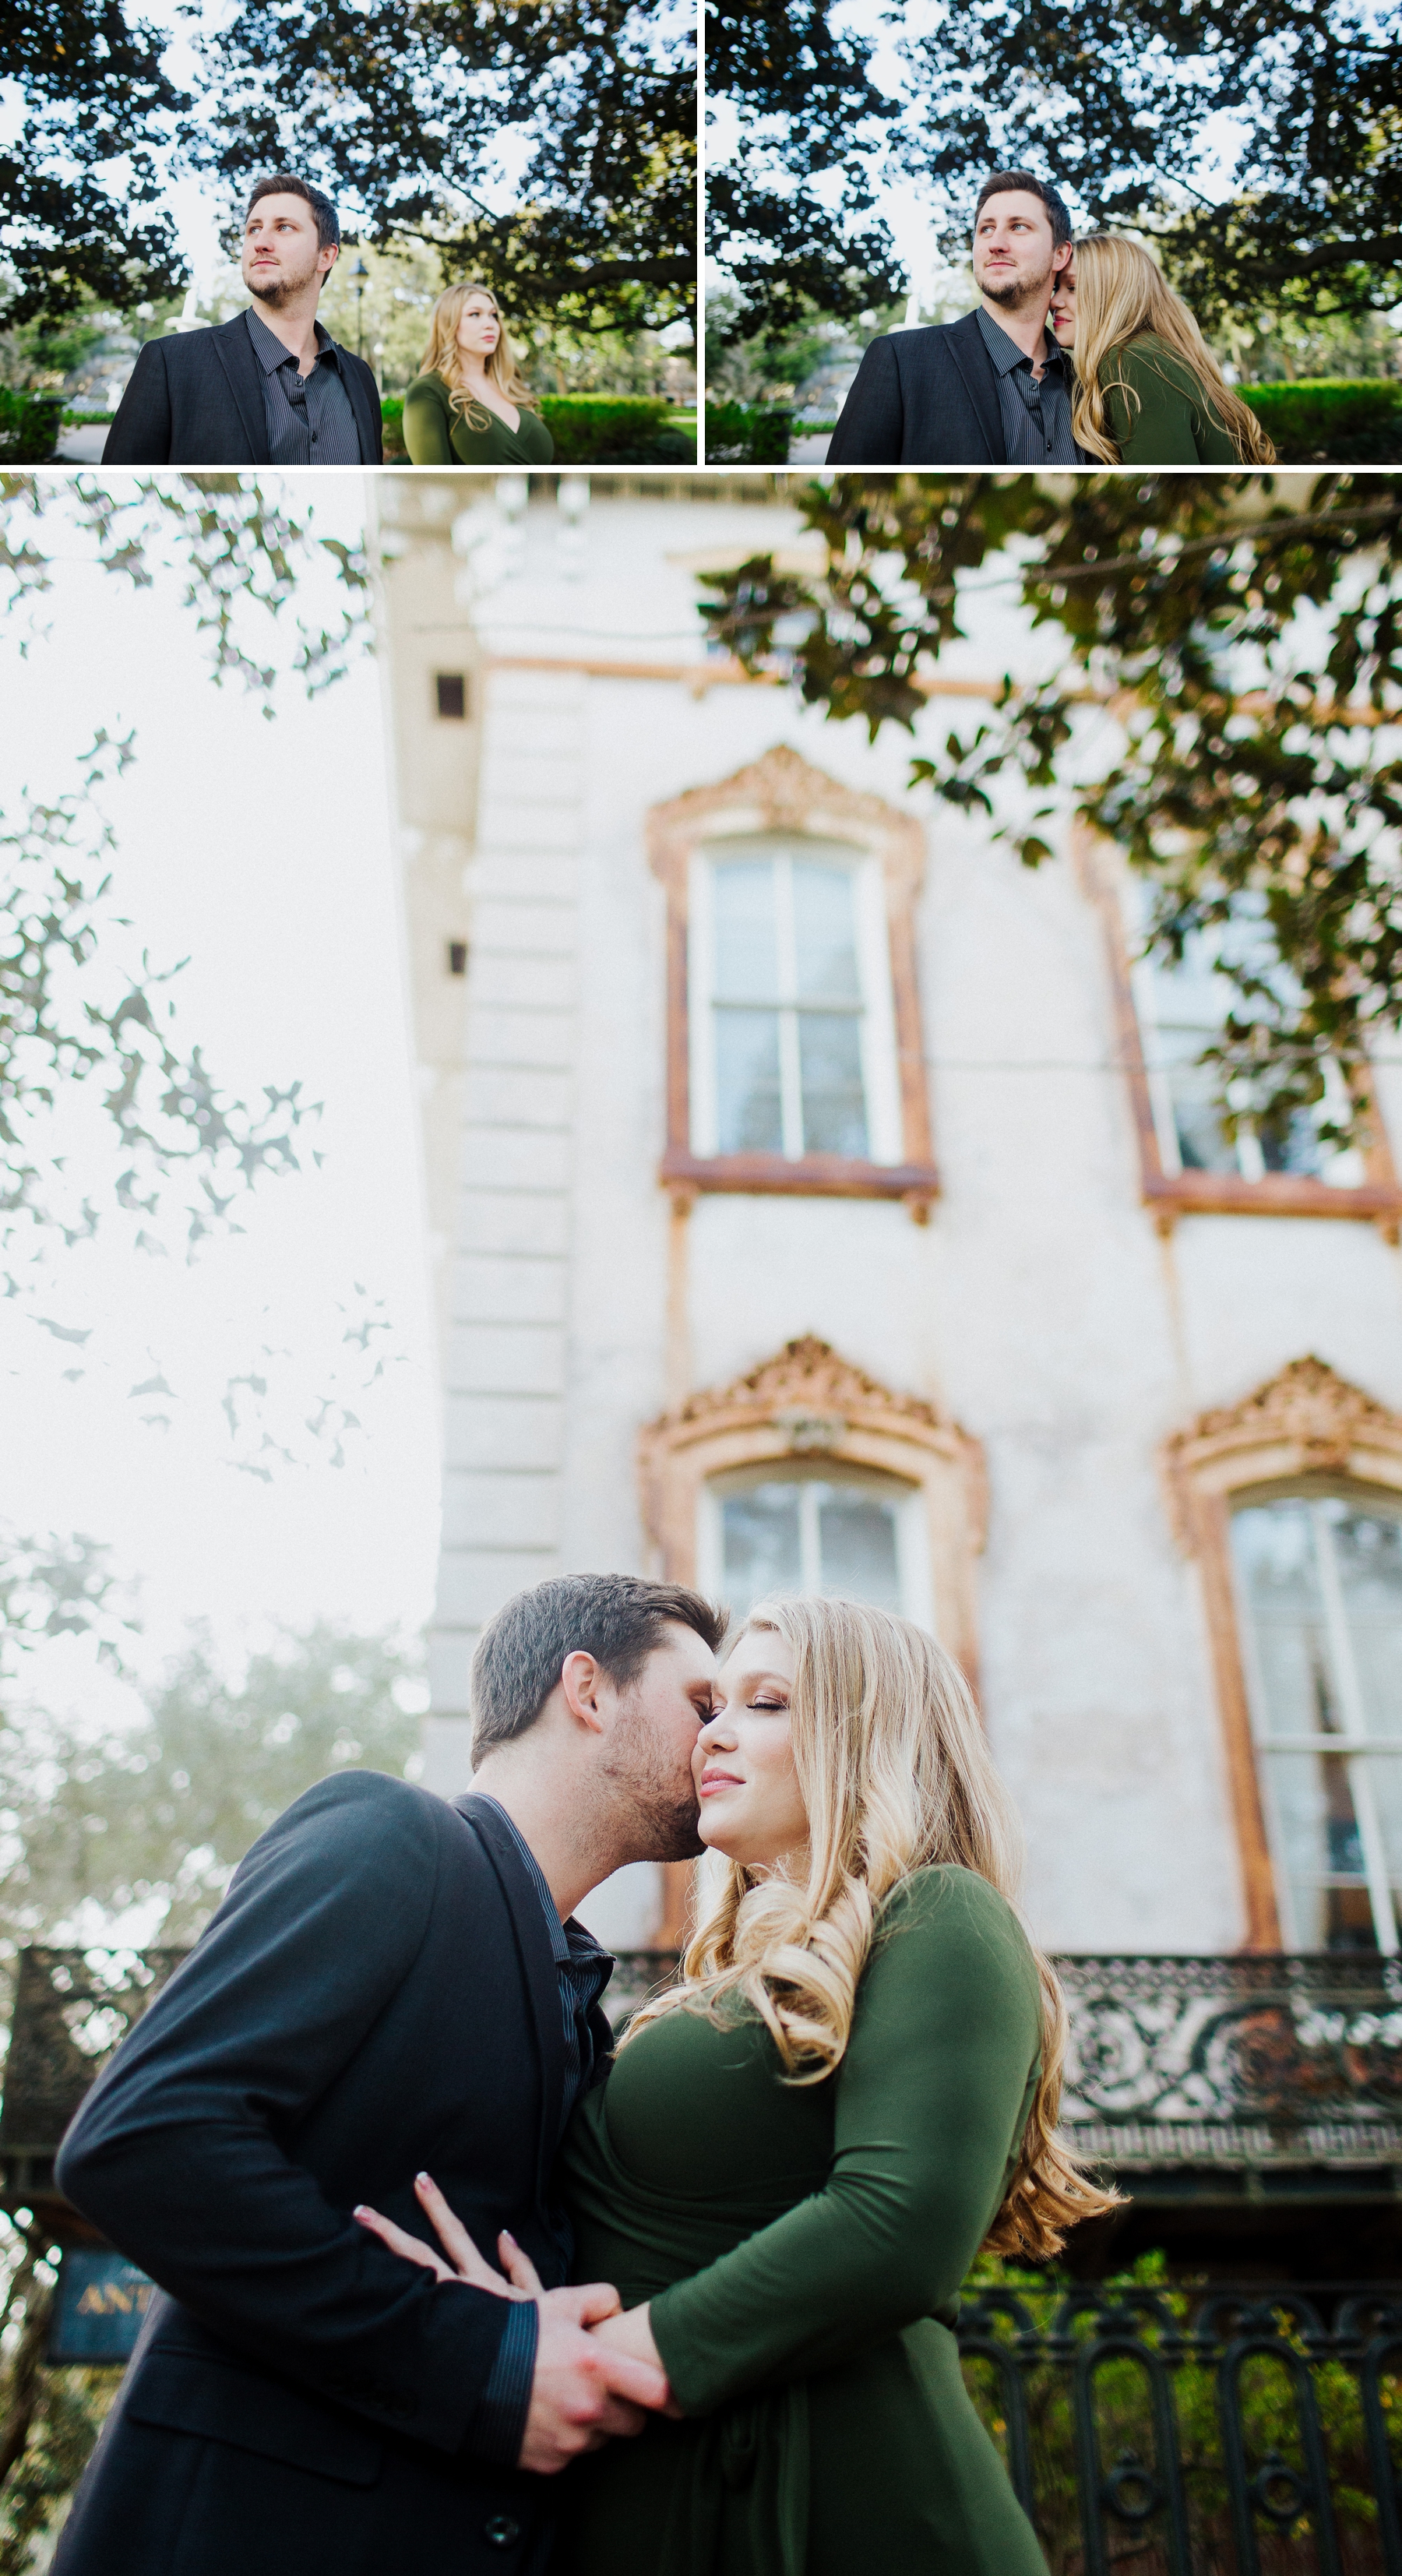 Engagement Session in Downtown Savannah, Georgia – Izzy Hudgins Photography